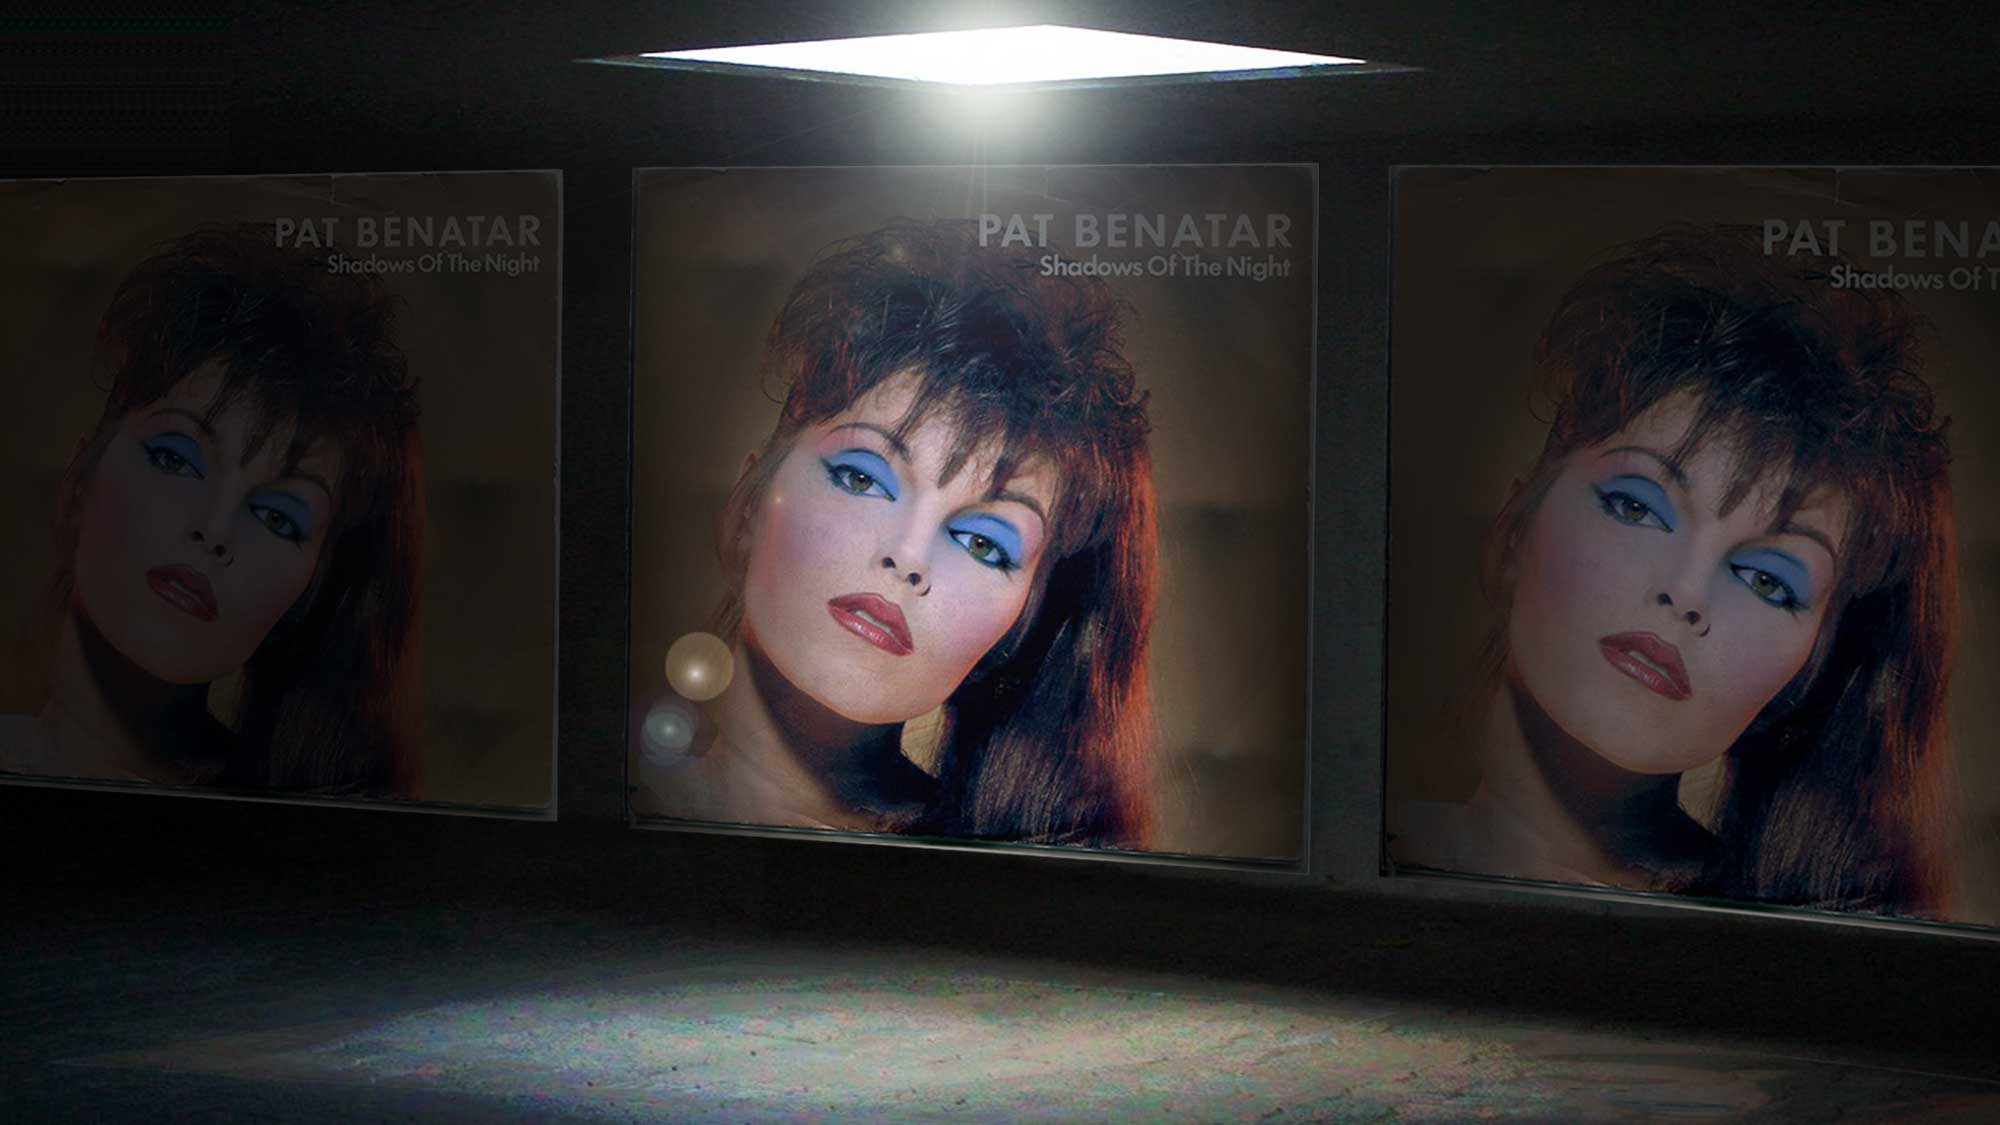 3 Things You Didn't Know About Shadows Of The Night By Pat Benatar